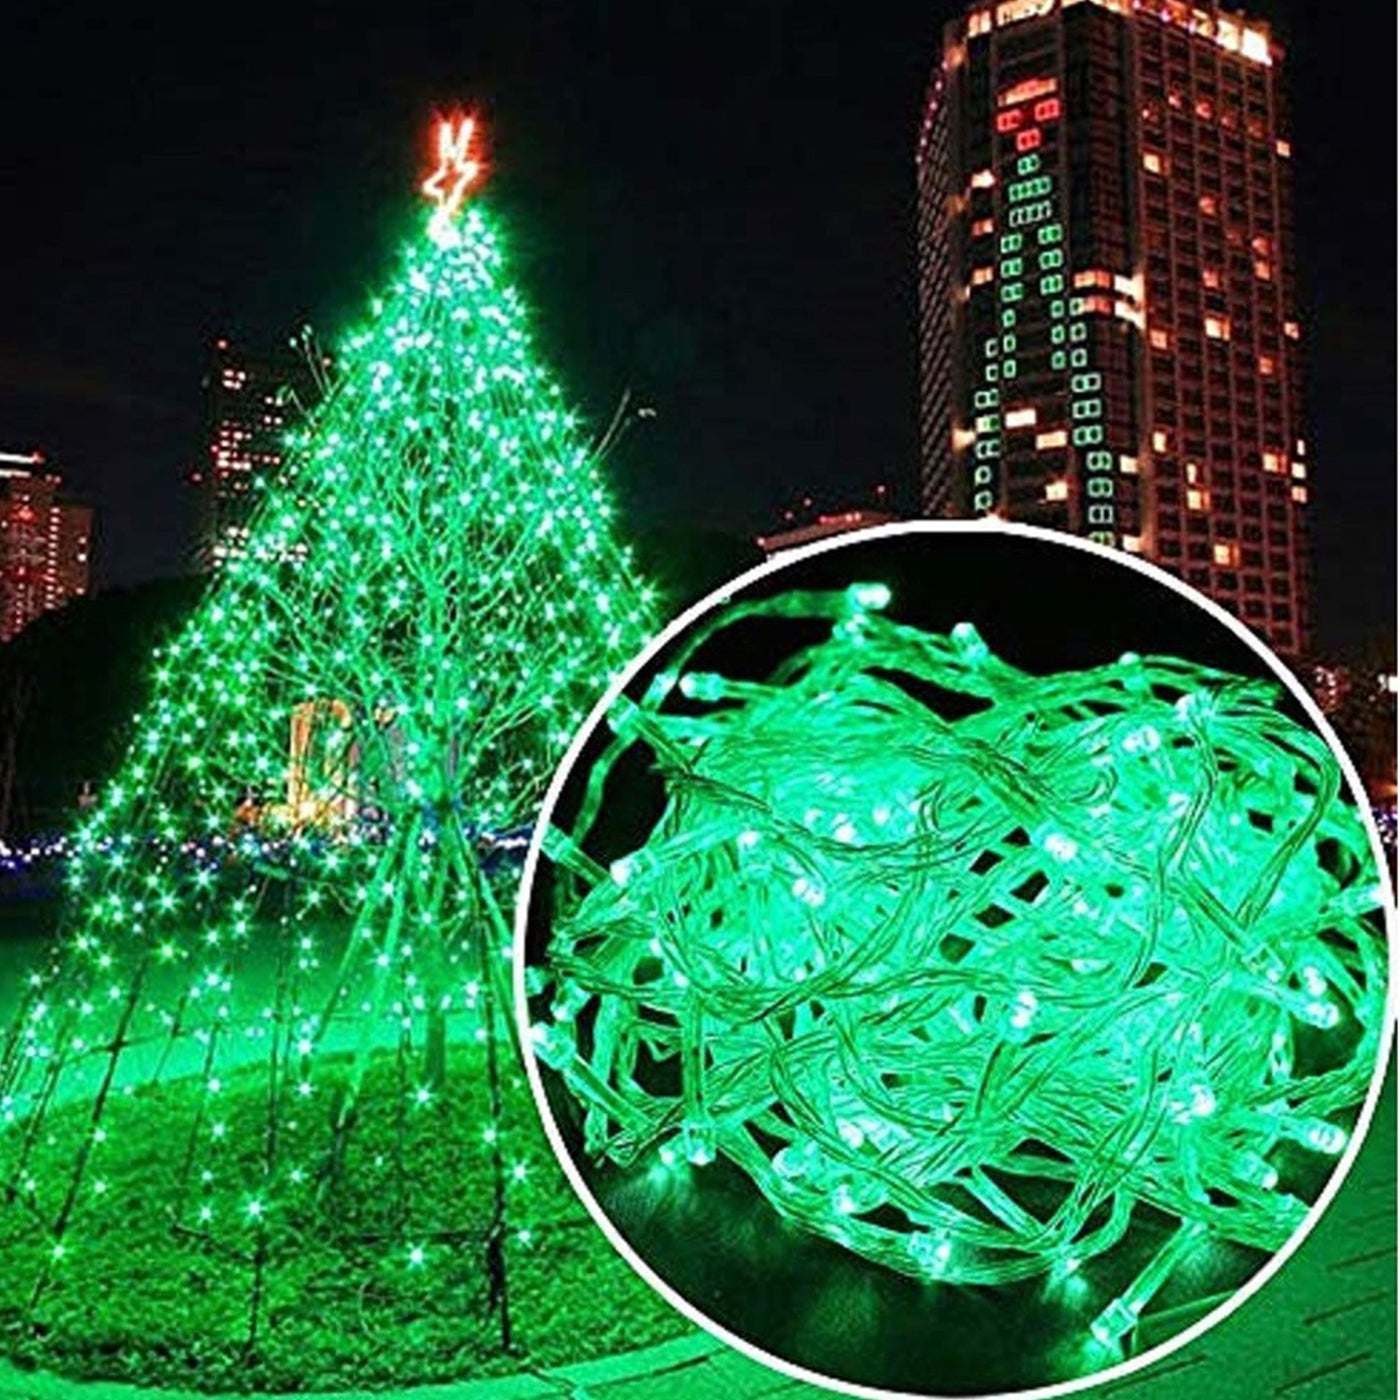 DecorTwist LED String Light for Home and Office Decor | Indoor & Outdoor Decorative Lights | Christmas | Diwali | Wedding | (Green) 12 Meter Length |(Pack of 2)